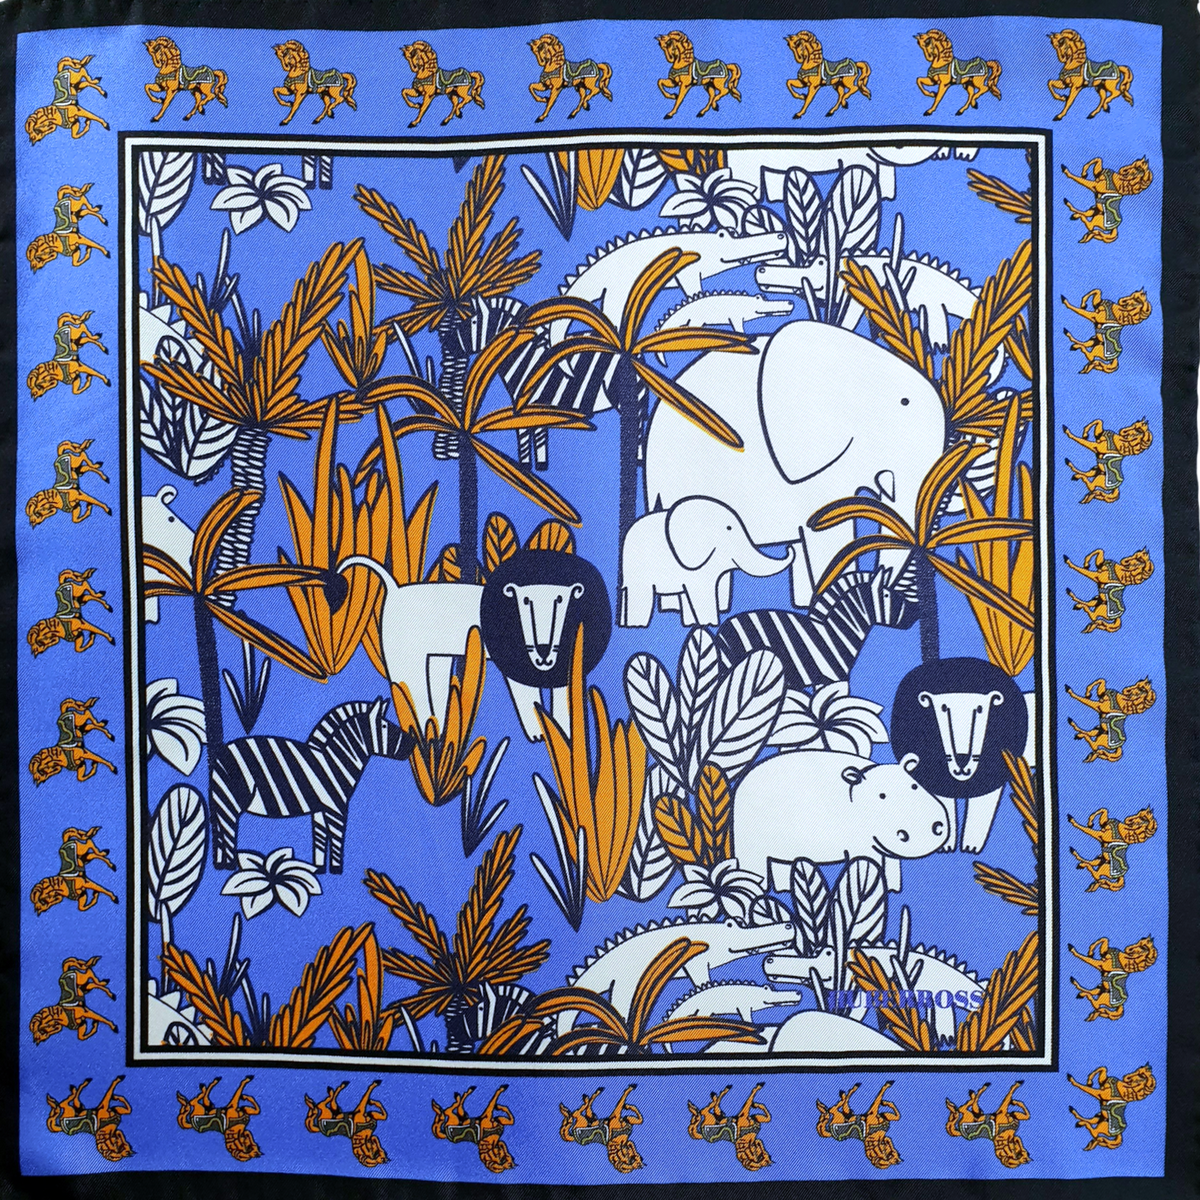 HUBERROSS 100% Silk Pocket Square PS136 Tale of the Jungle Blue